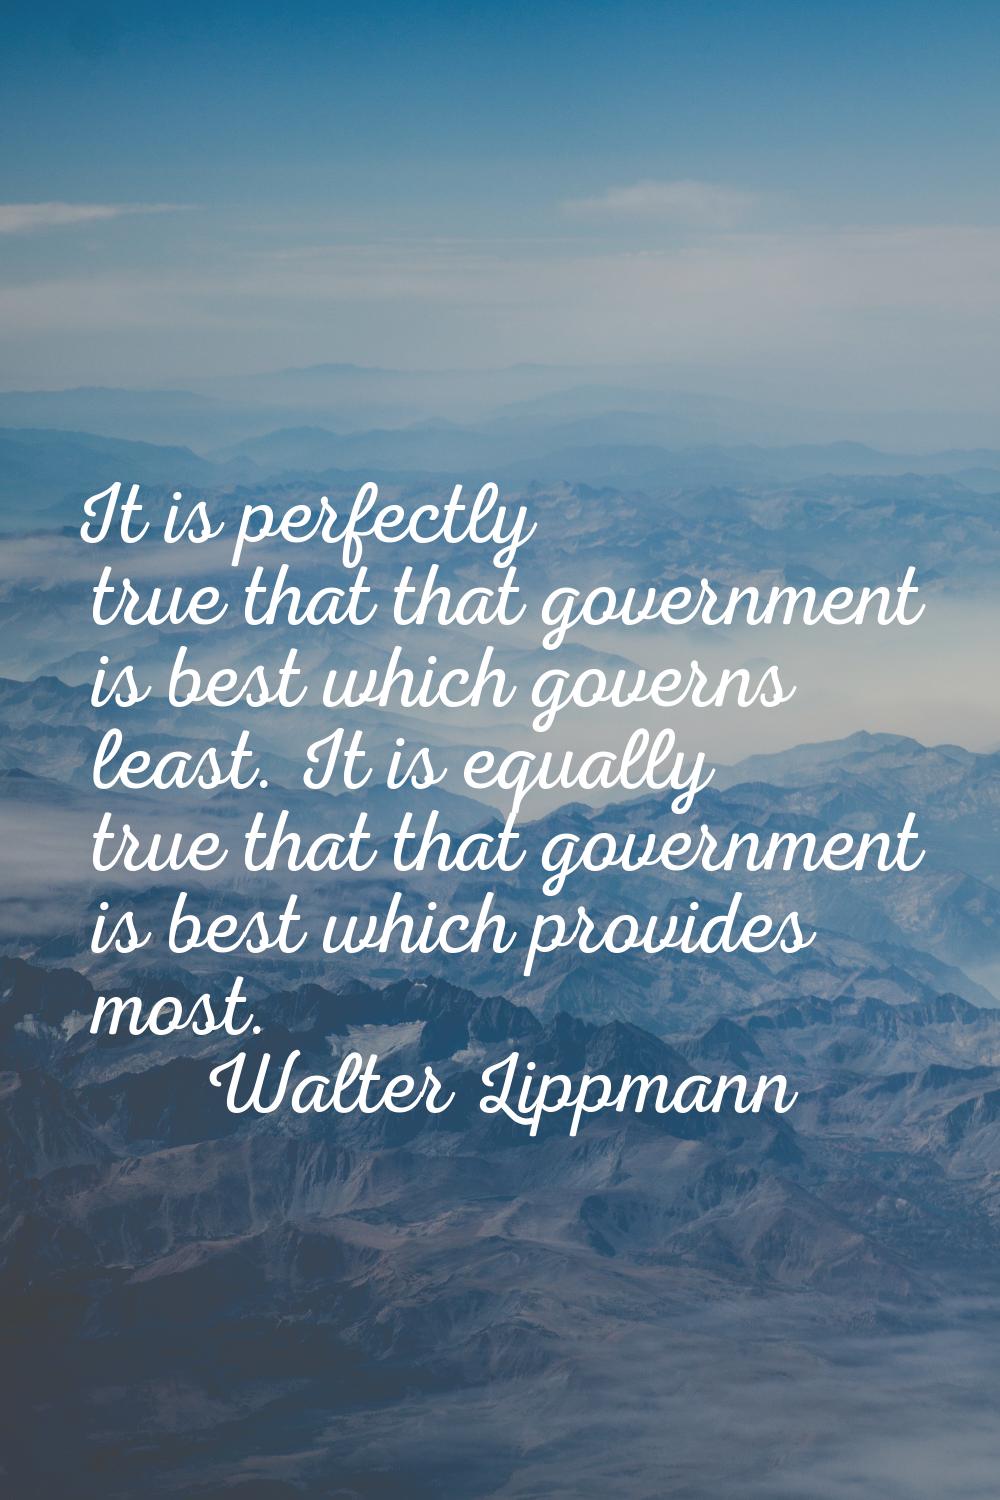 It is perfectly true that that government is best which governs least. It is equally true that that